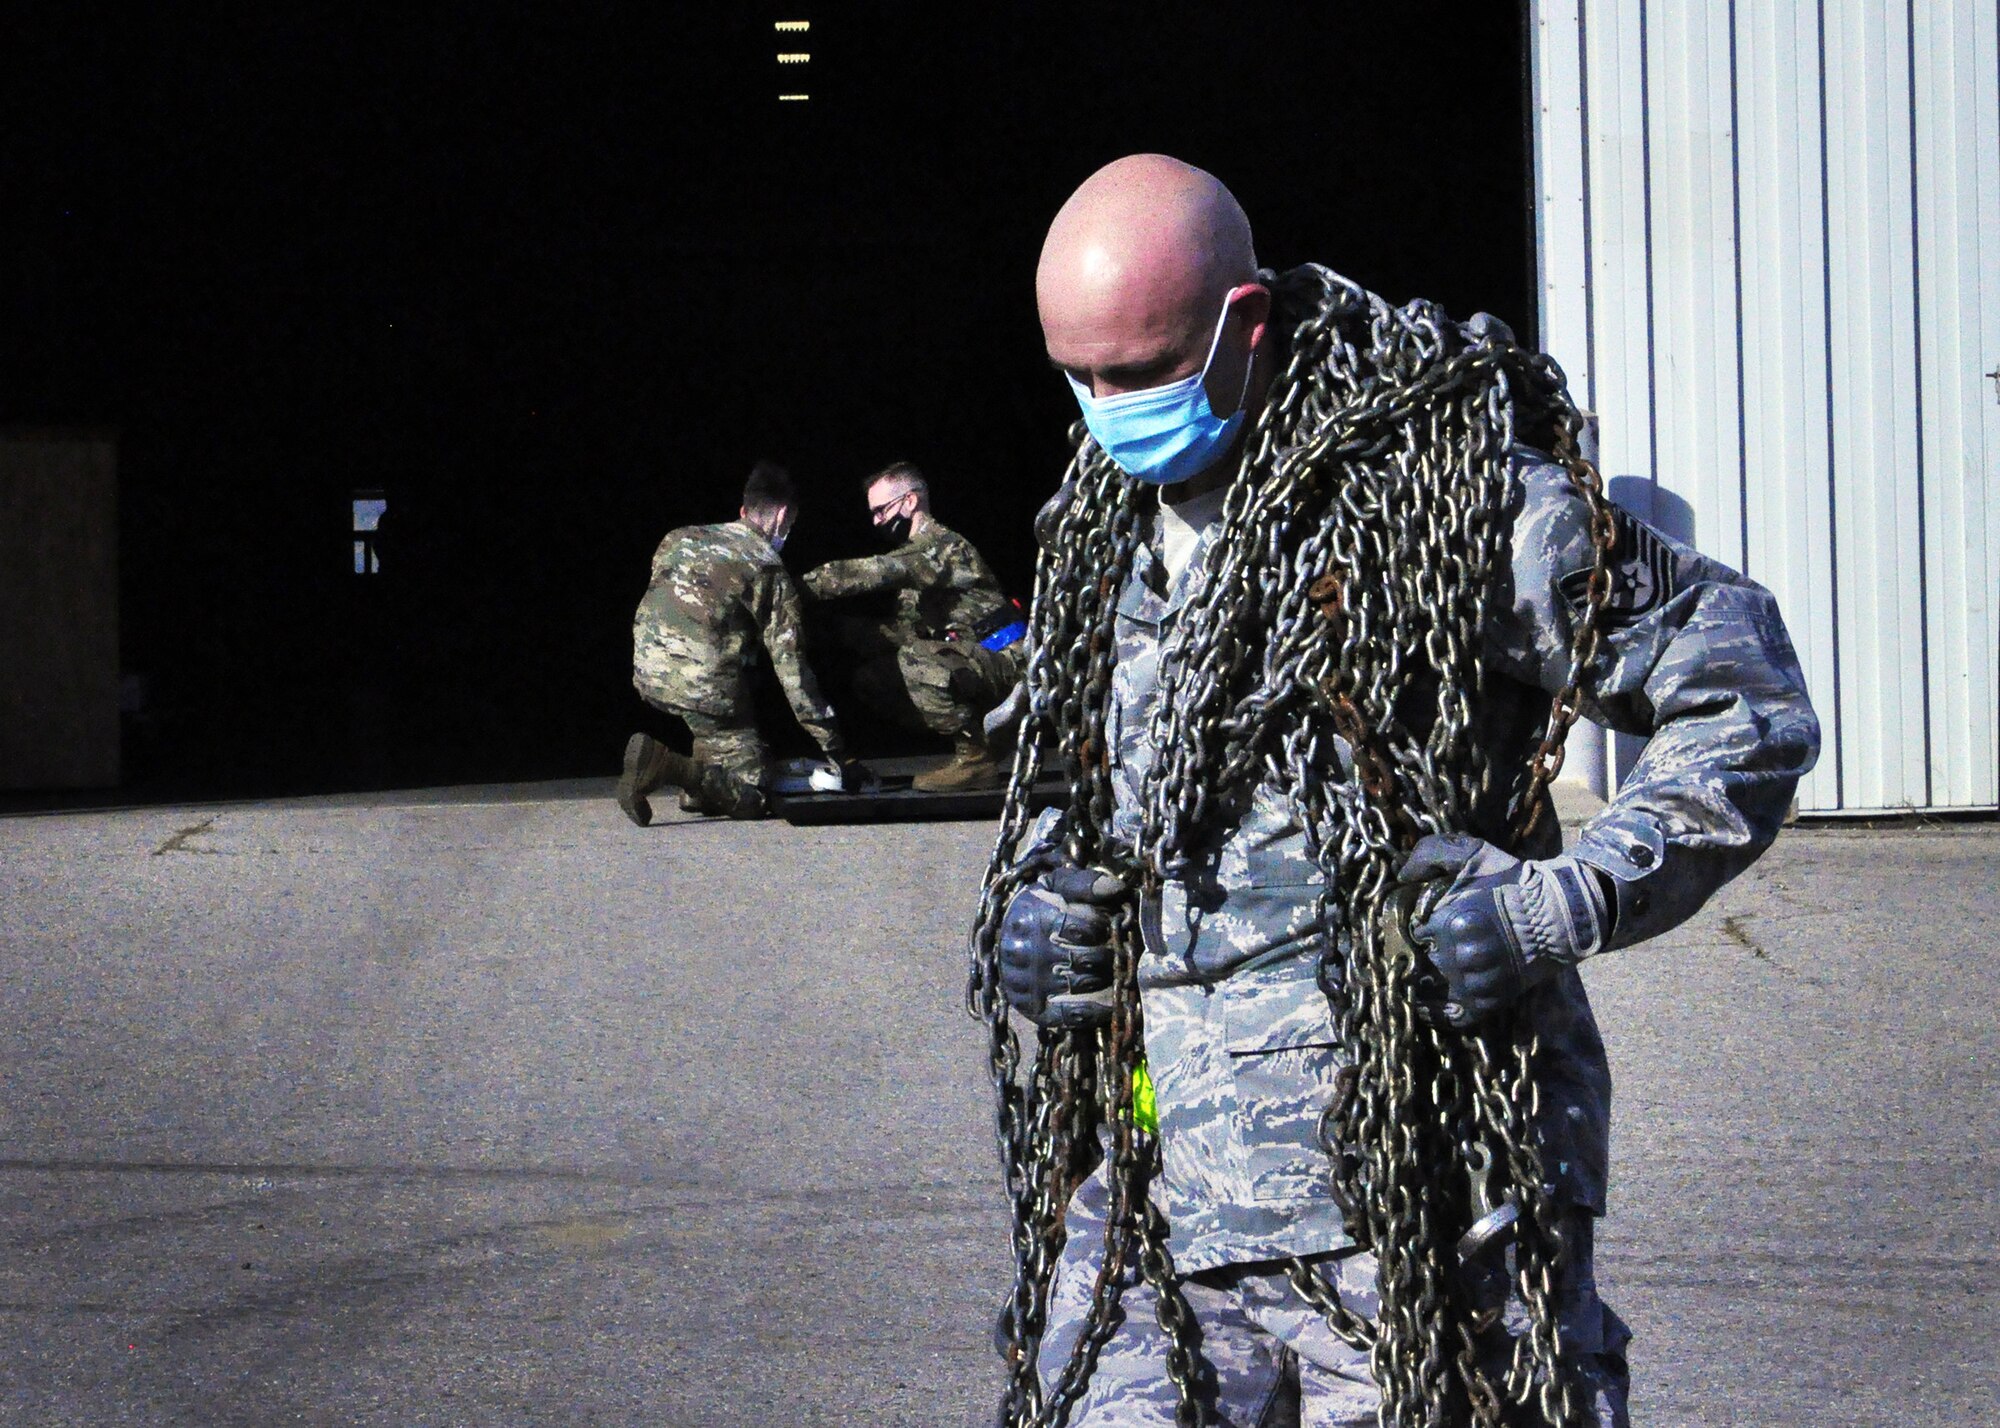 Tech. Sgt. John Hardisky, 87th Aerial Port Squadron cargo processing supervisor, hauls cargo chains across a competition course during the 87th Aerial Port Squadron’s semi-annual Port Dawg Challenge Oct. 17, 2020. Port Dawgs rely on chains to secure a variety of cargo types for military airlift.